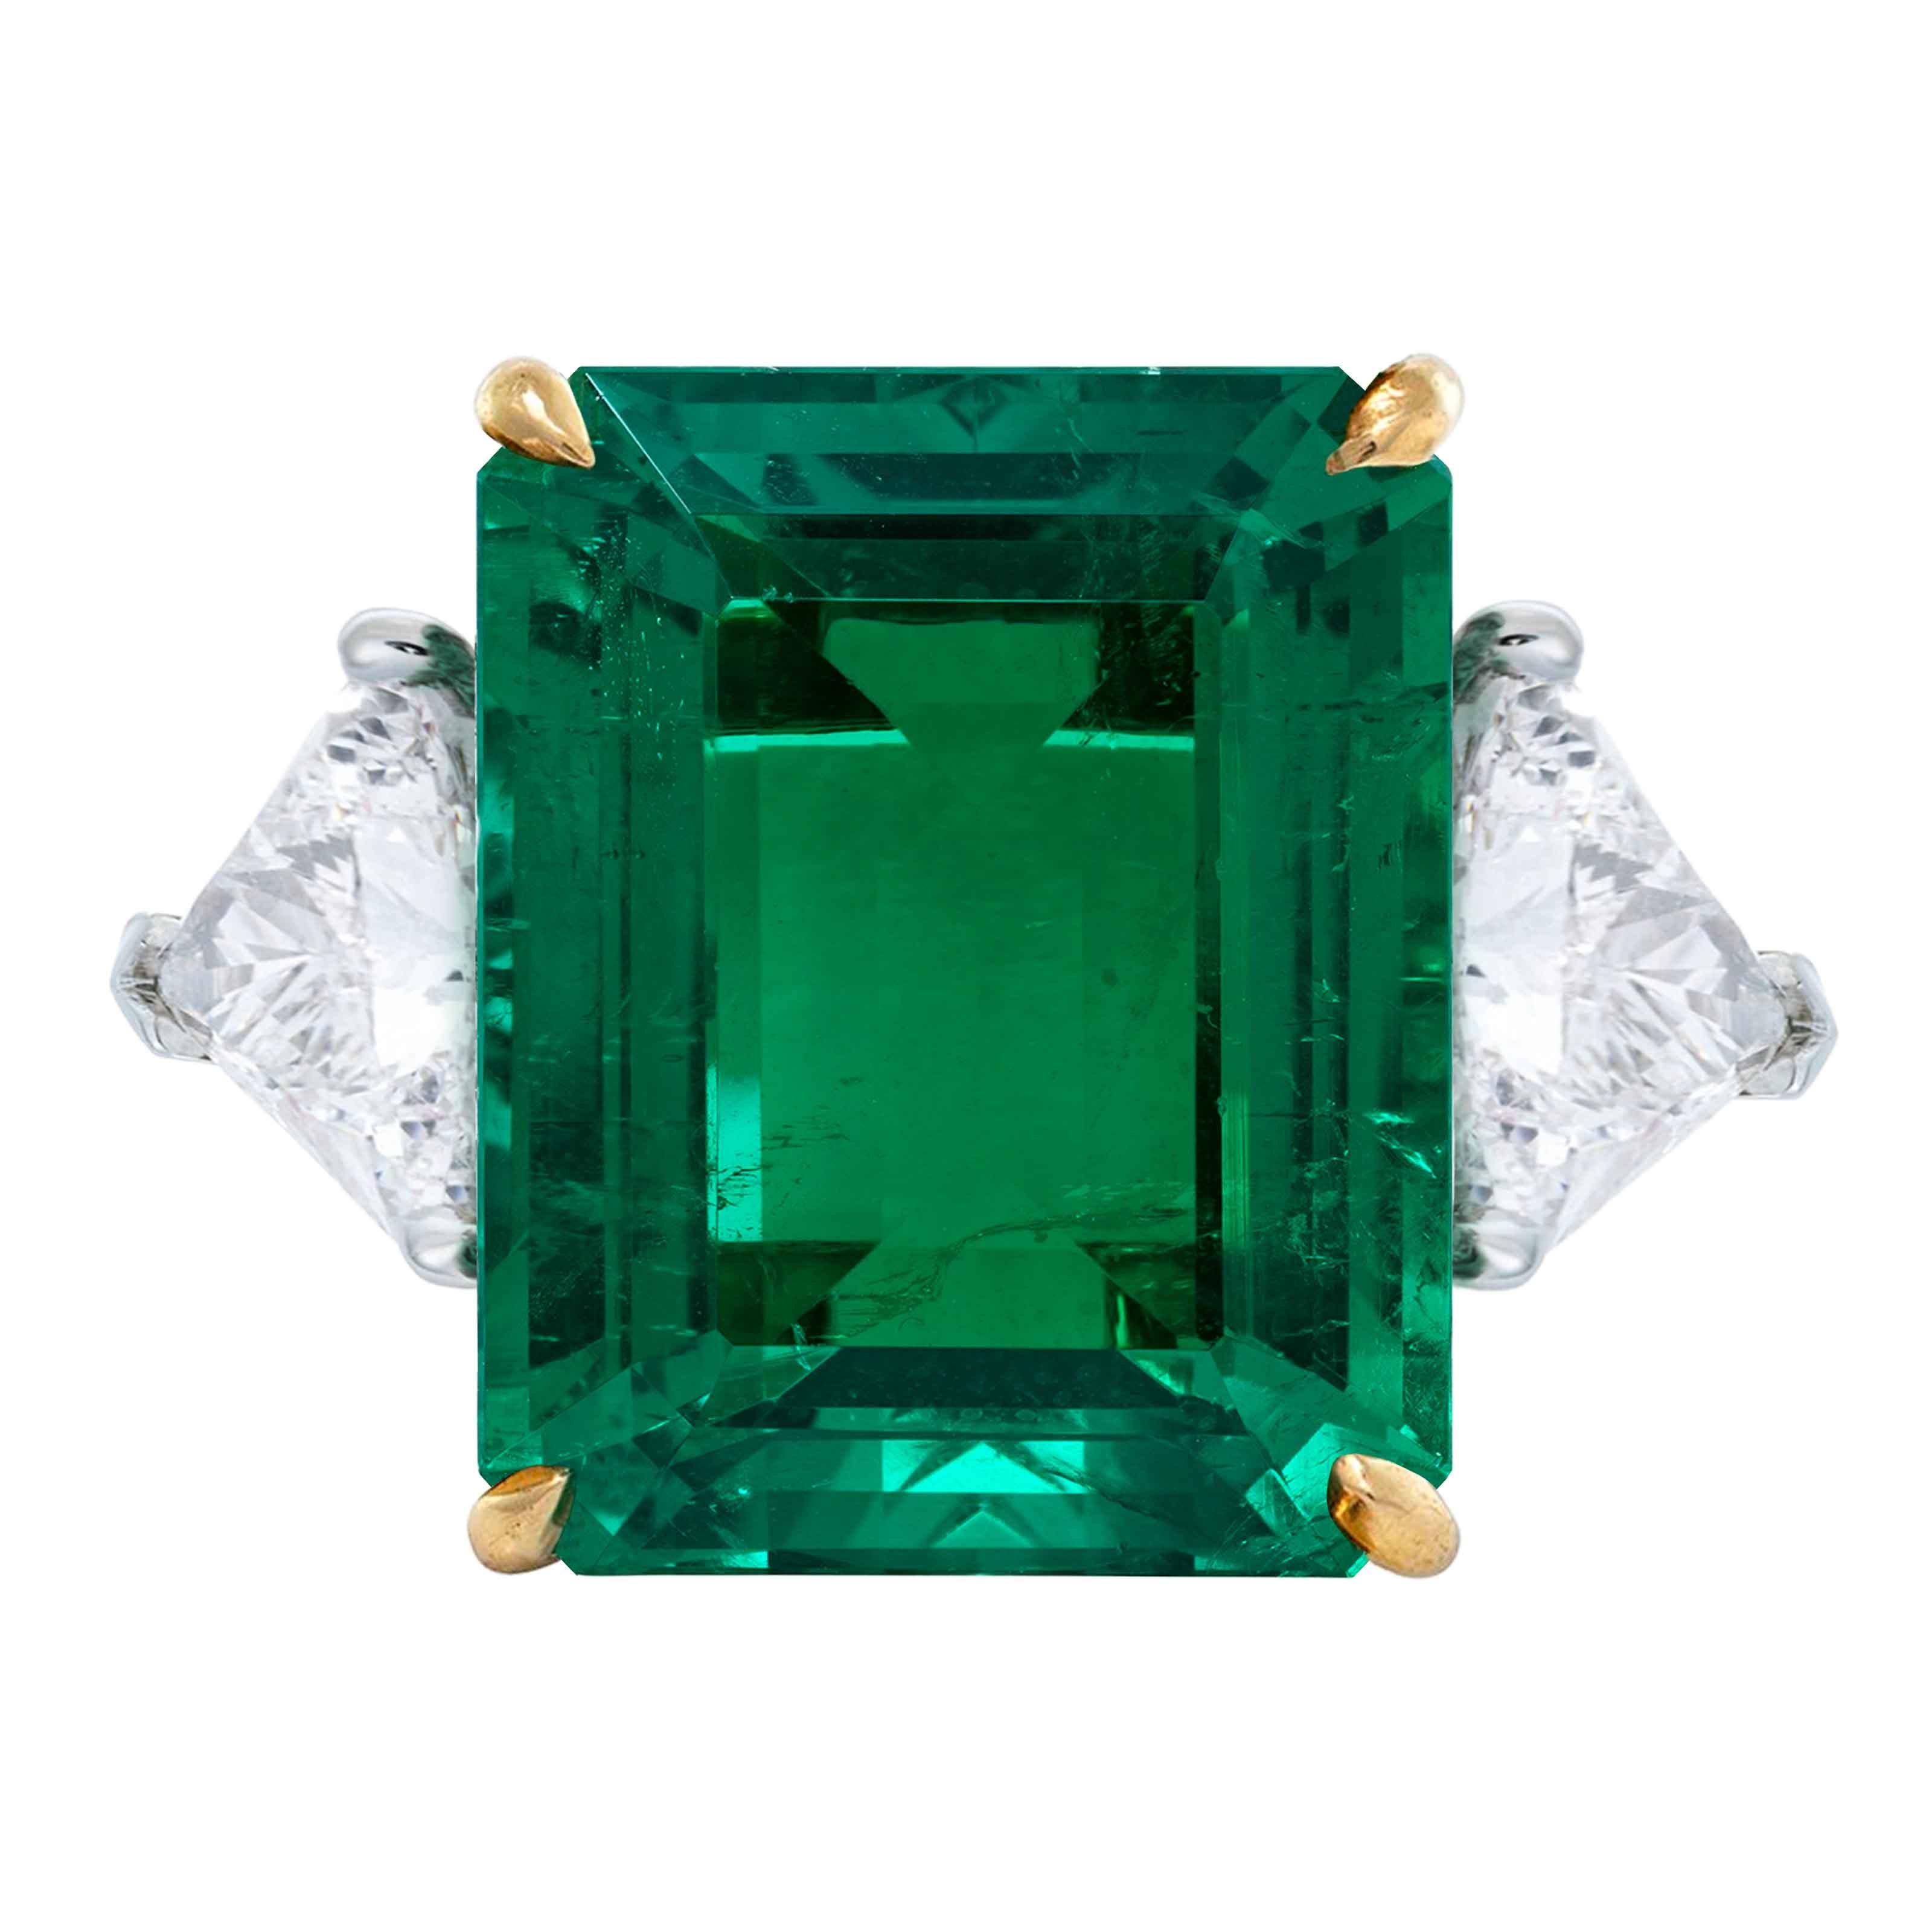  AGL Certified 13 Carat Green Emerald Trillion Side Diamond Ring:

Experience the epitome of luxury with our AGL Certified 13 Carat Green Emerald Trillion Side Diamond Ring. This magnificent ring features a breathtaking 13 carat green emerald,